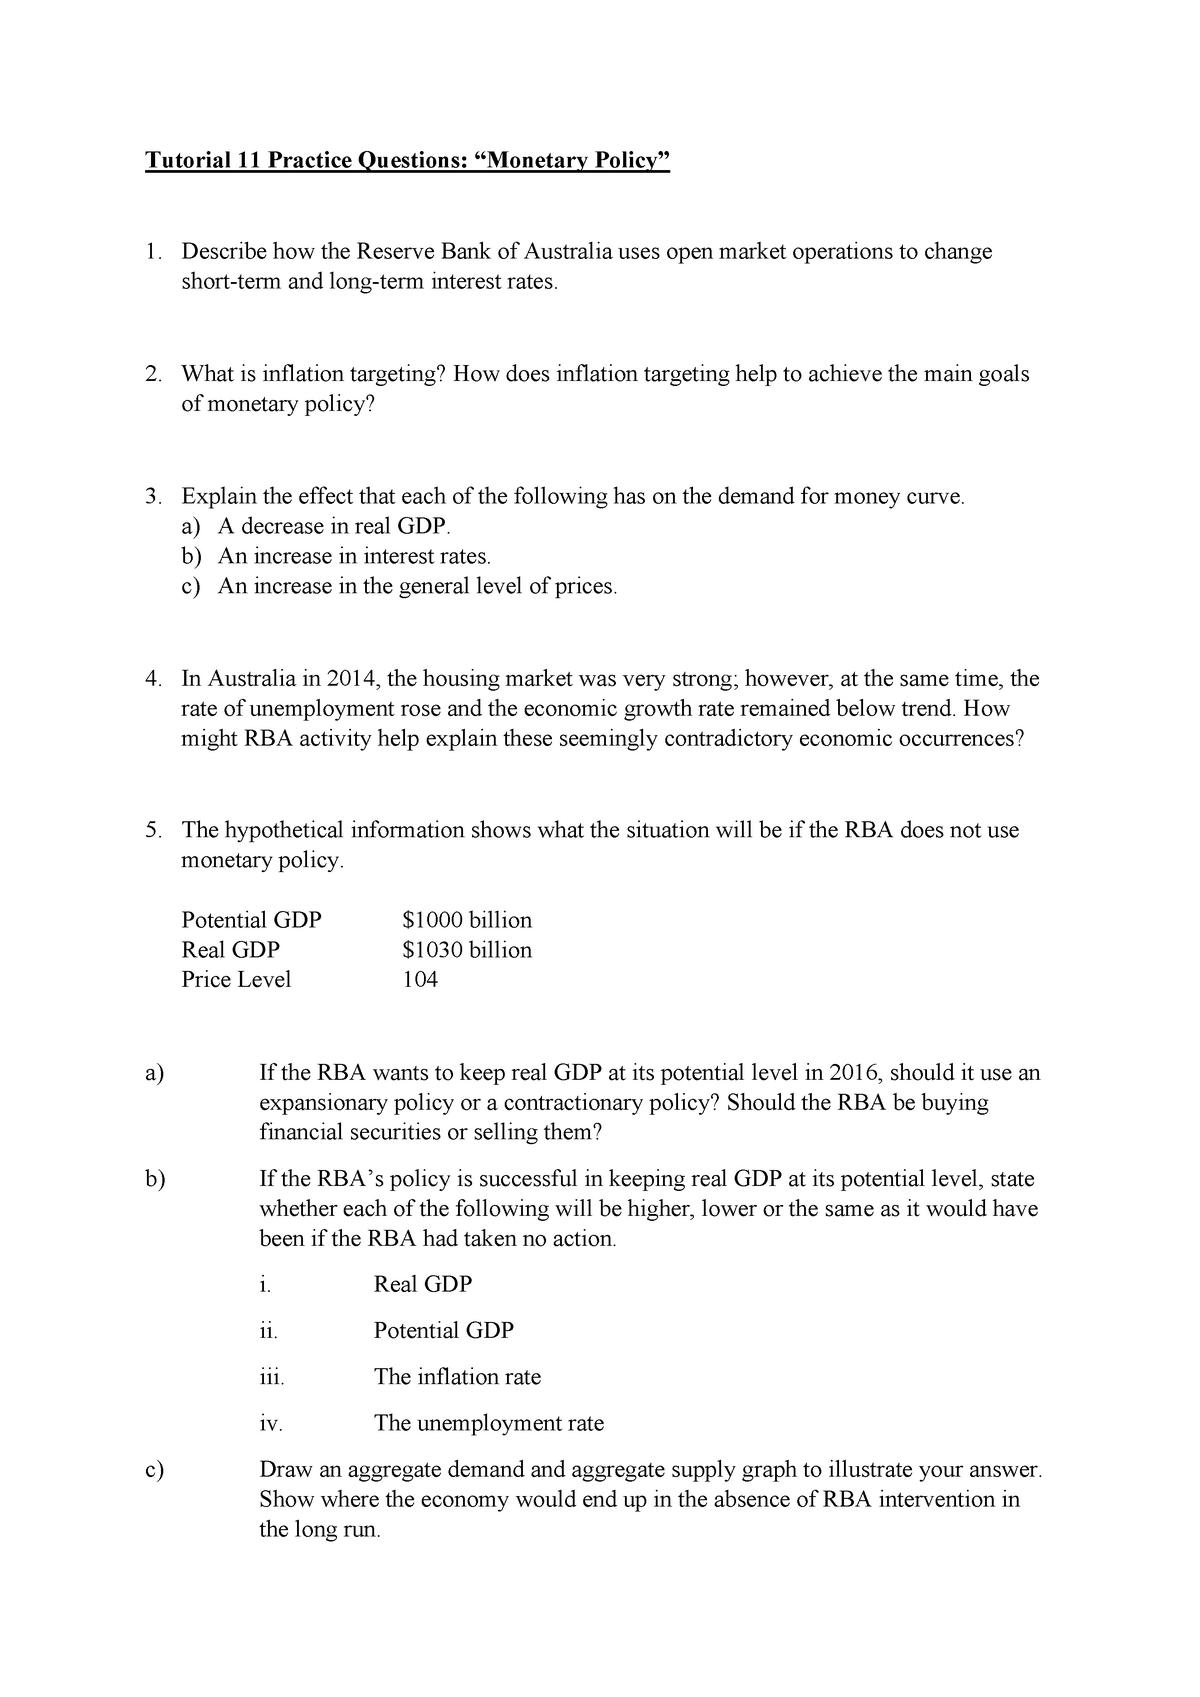 monetary policy essay questions